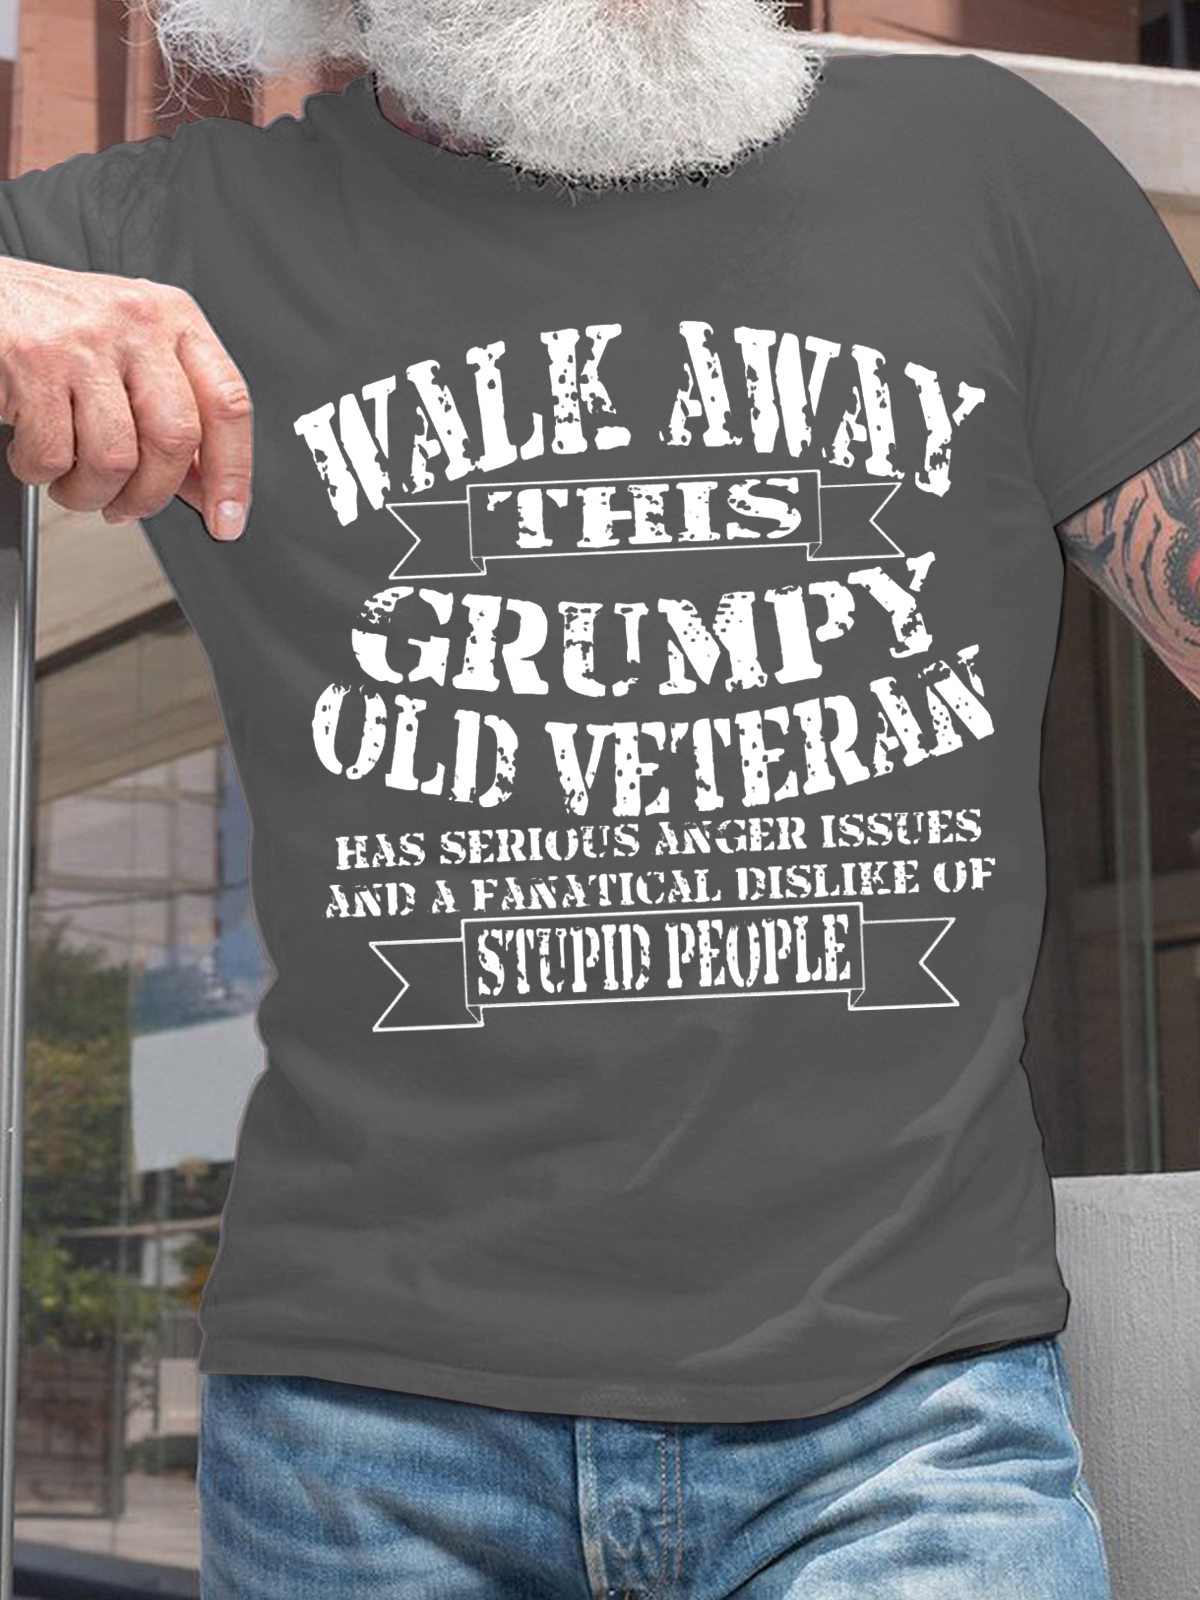 Cotton Grumpy Old Veteran on Casual Text Letters Loose T-Shirt